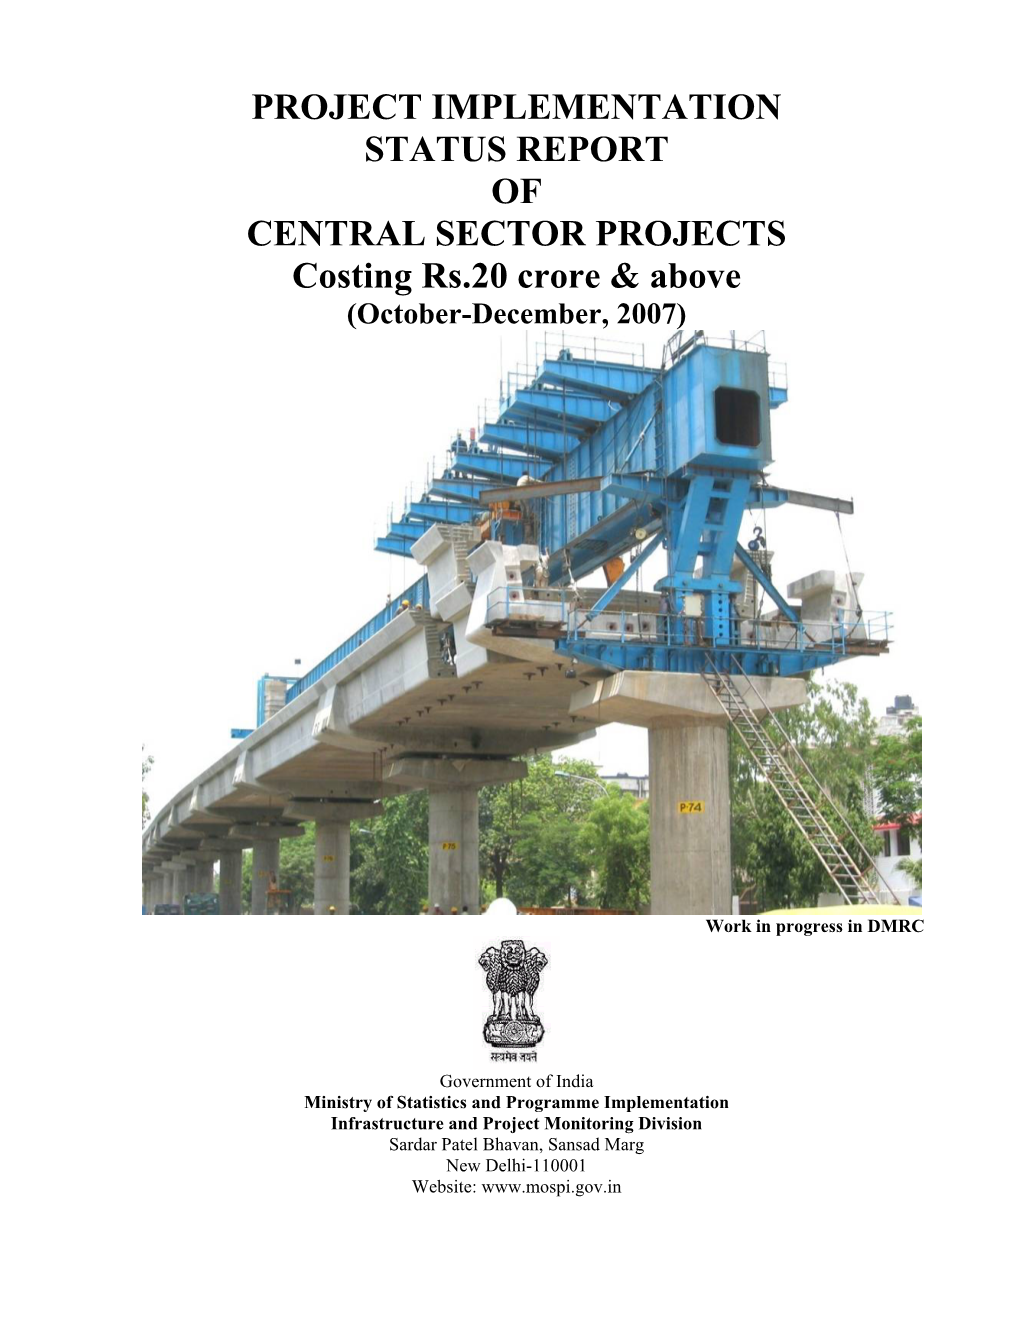 PROJECT IMPLEMENTATION STATUS REPORT of CENTRAL SECTOR PROJECTS Costing Rs.20 Crore & Above (October-December, 2007)